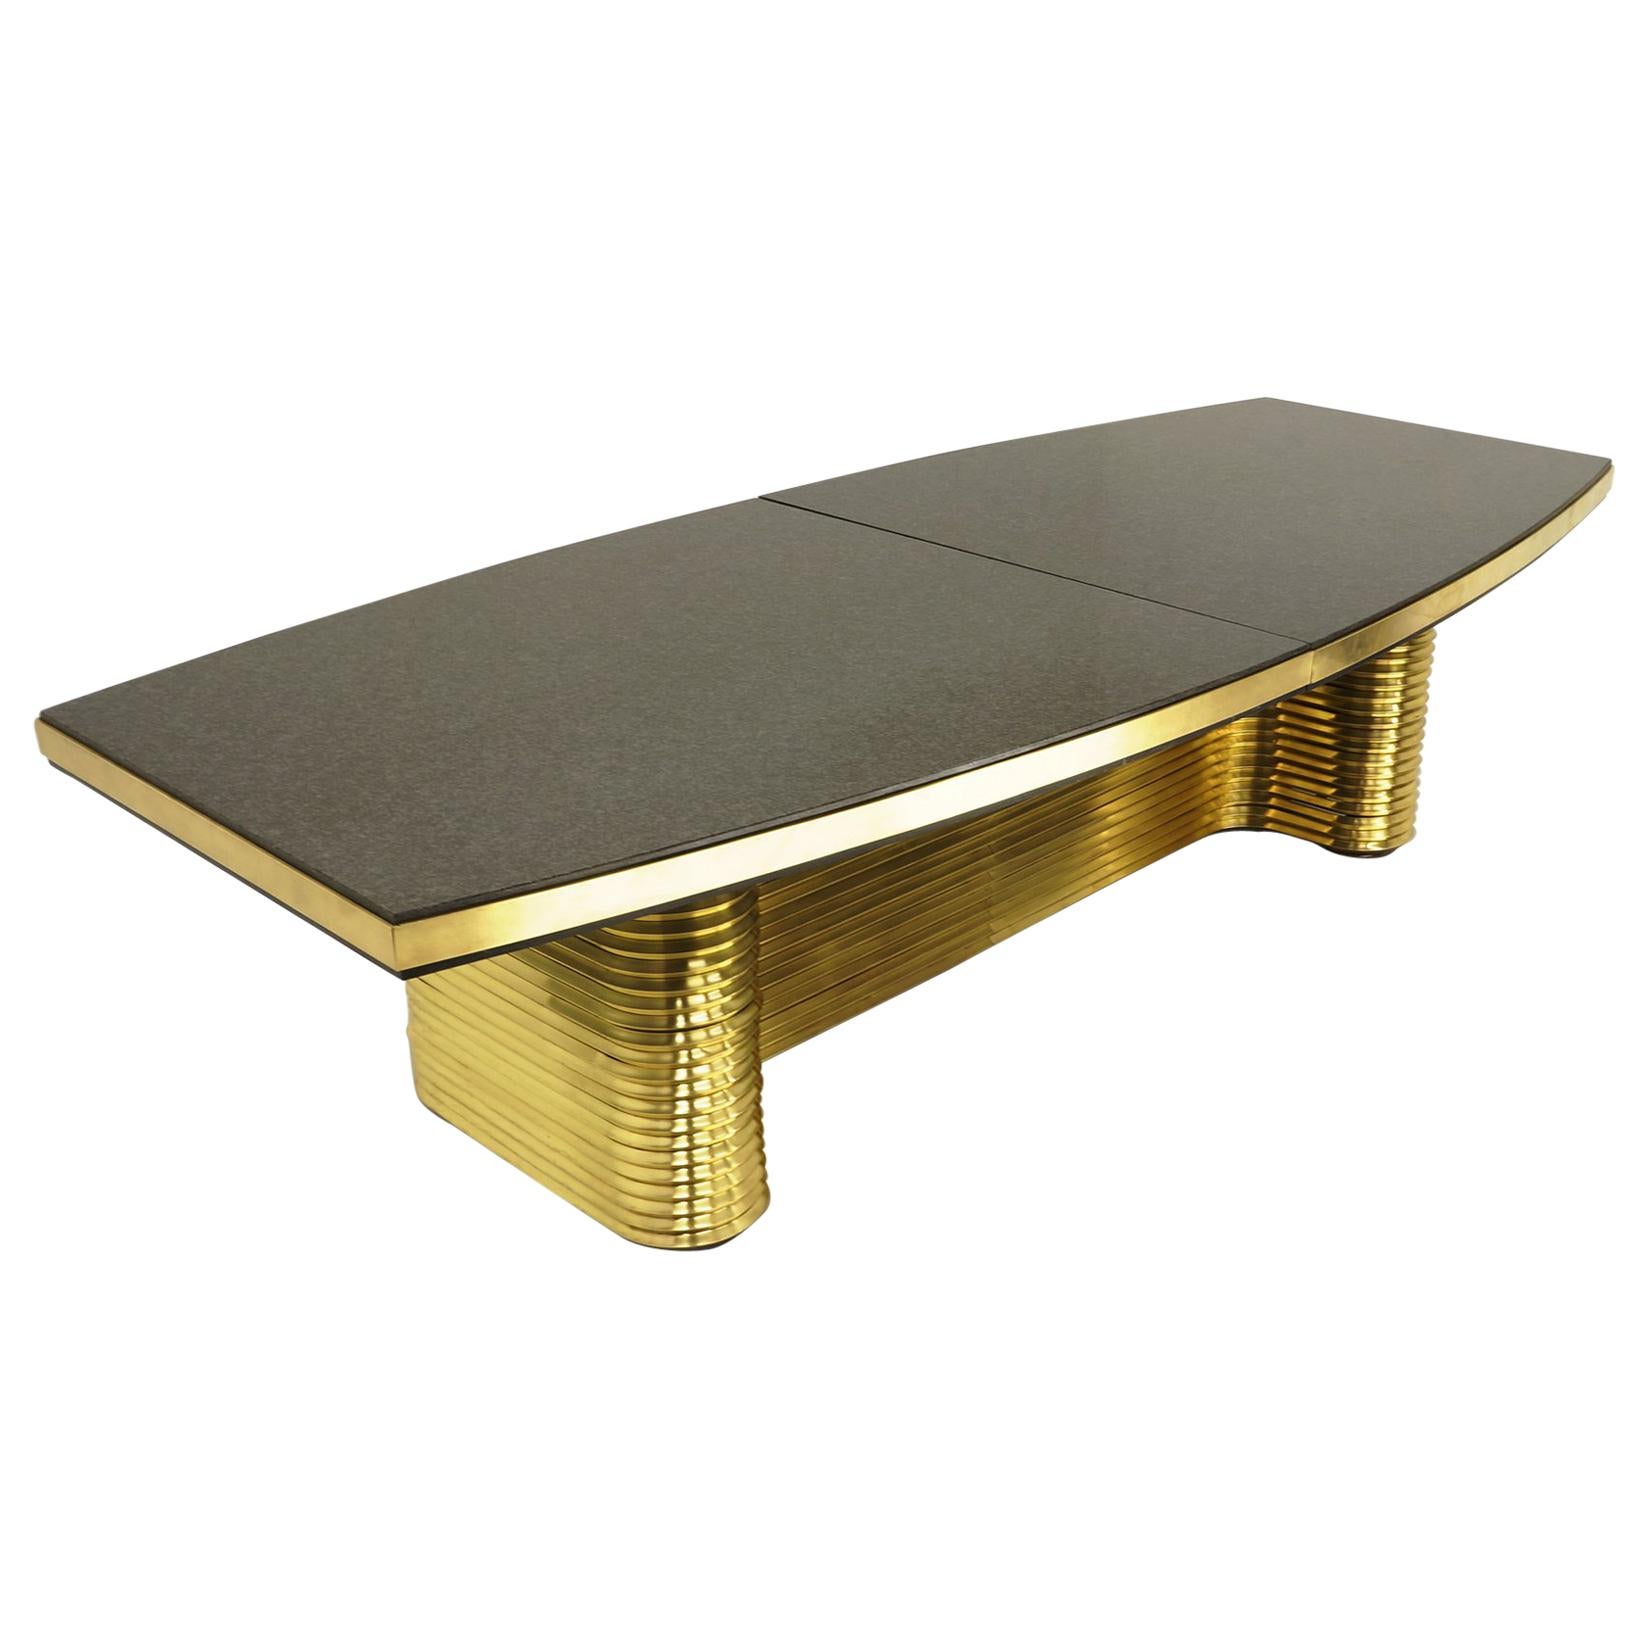 Custom Dining or Conference Table by Ed Moore, Brass and Charcoal Granite